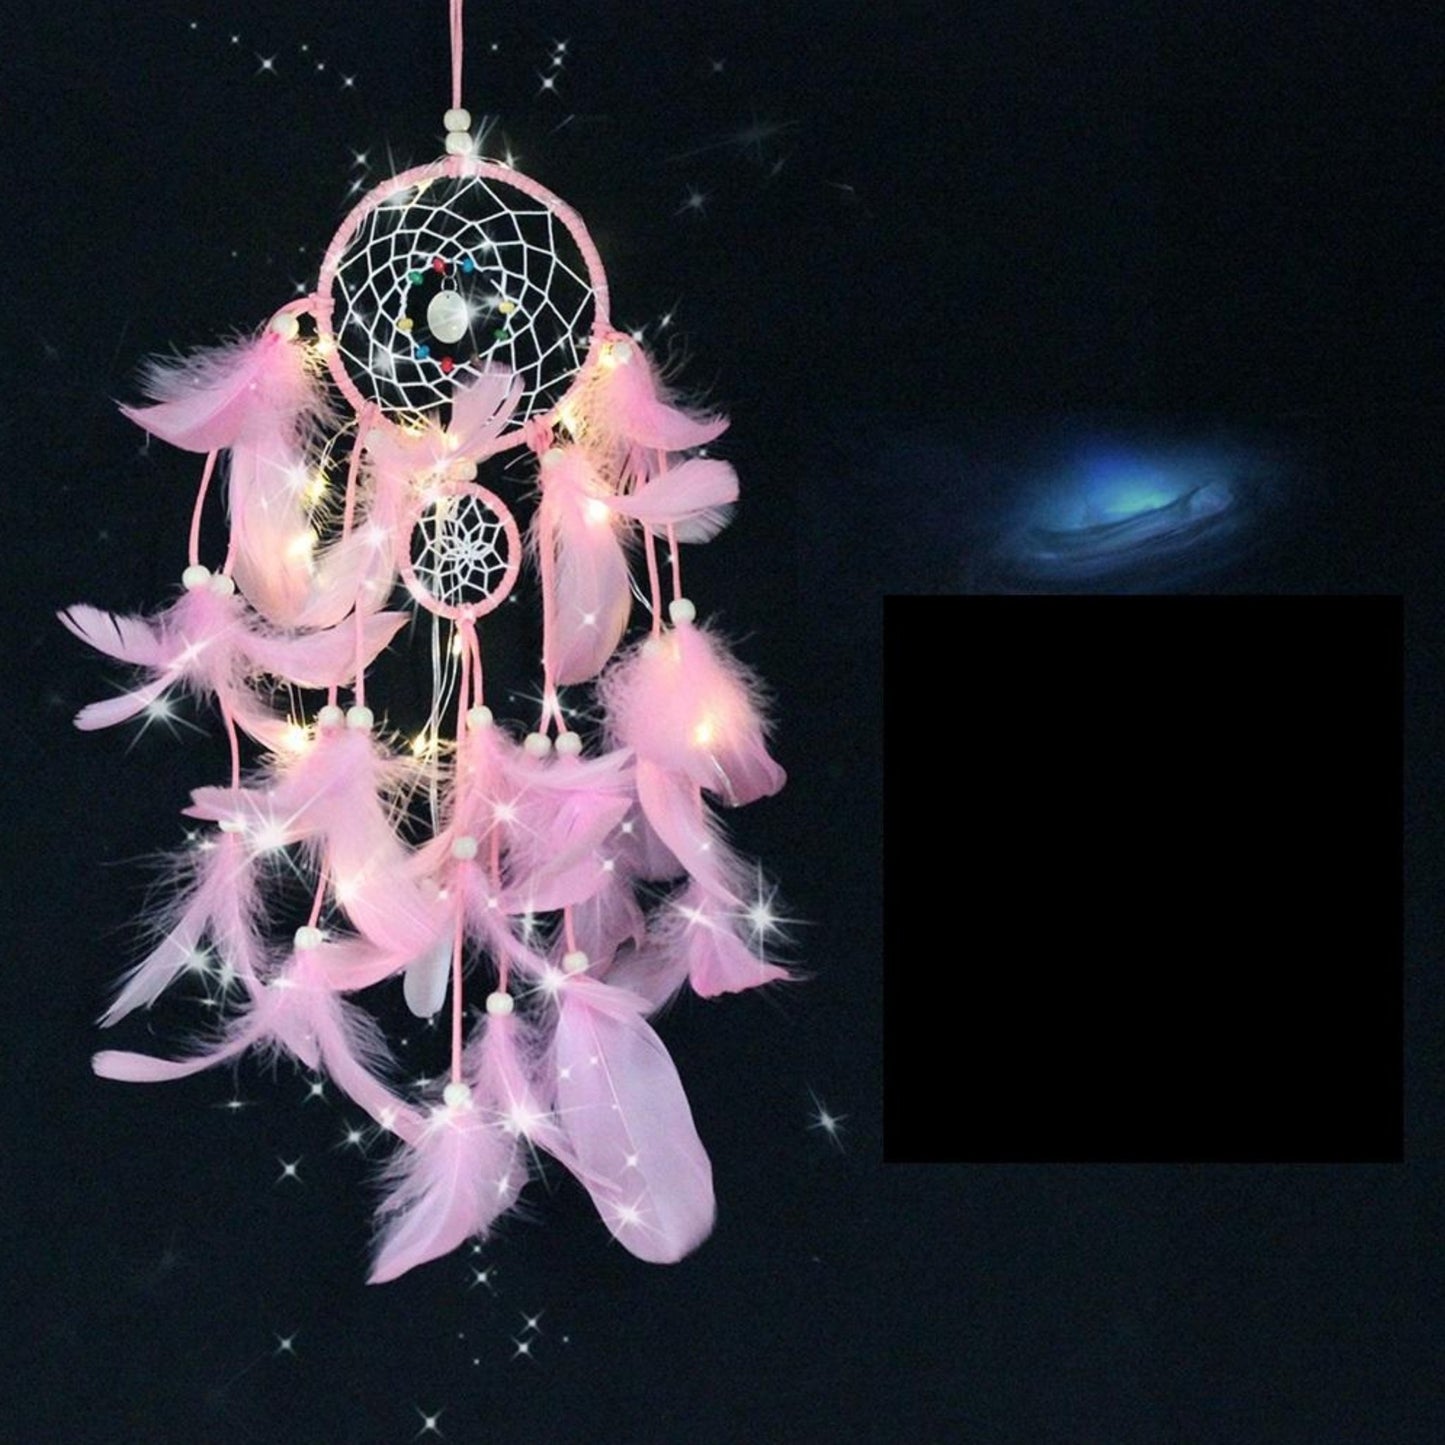 Dream Catcher with LED Lights - BloomBliss.com